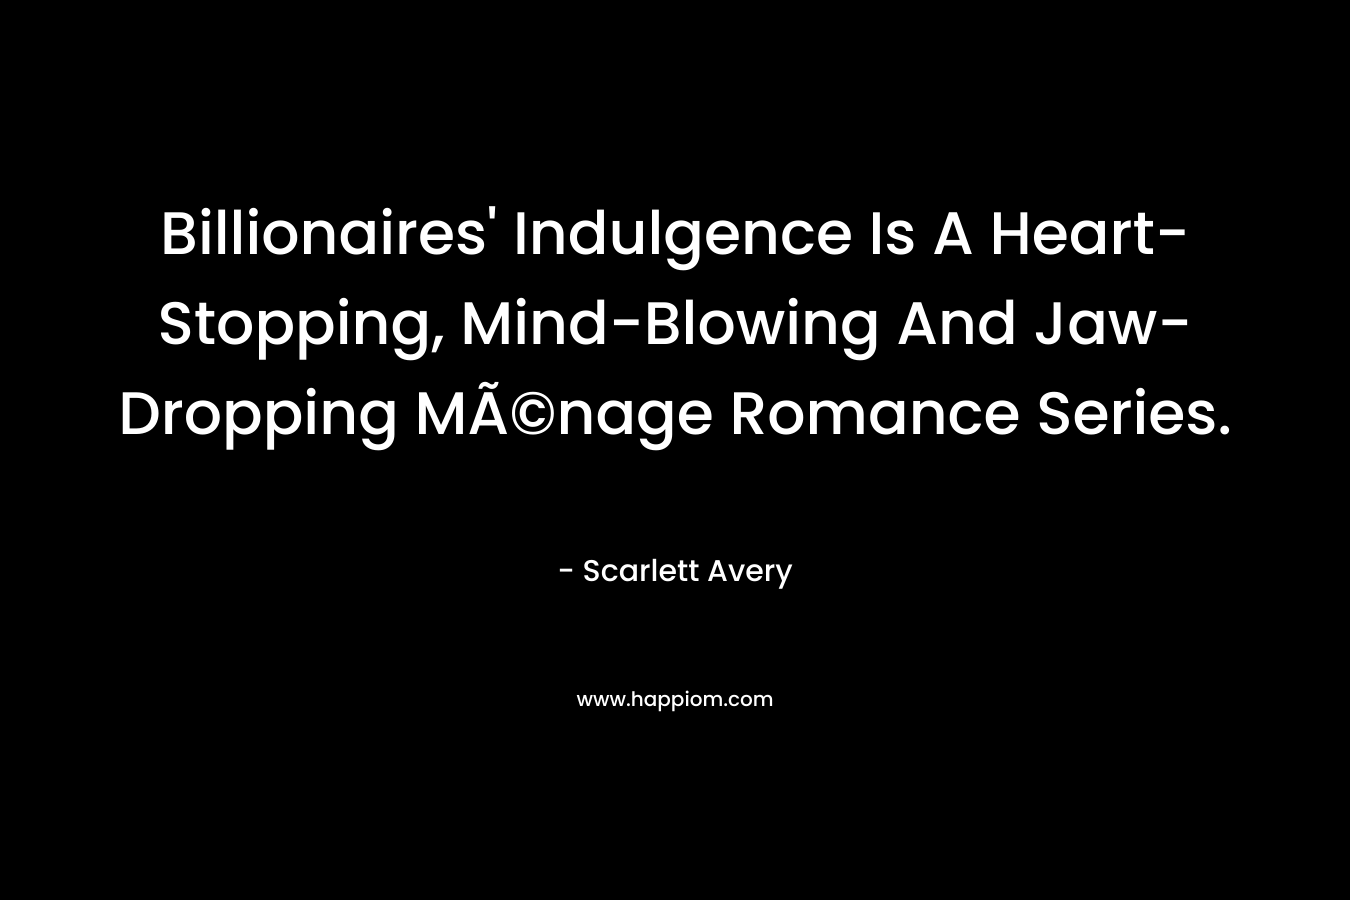 Billionaires’ Indulgence Is A Heart-Stopping, Mind-Blowing And Jaw-Dropping MÃ©nage Romance Series. – Scarlett Avery